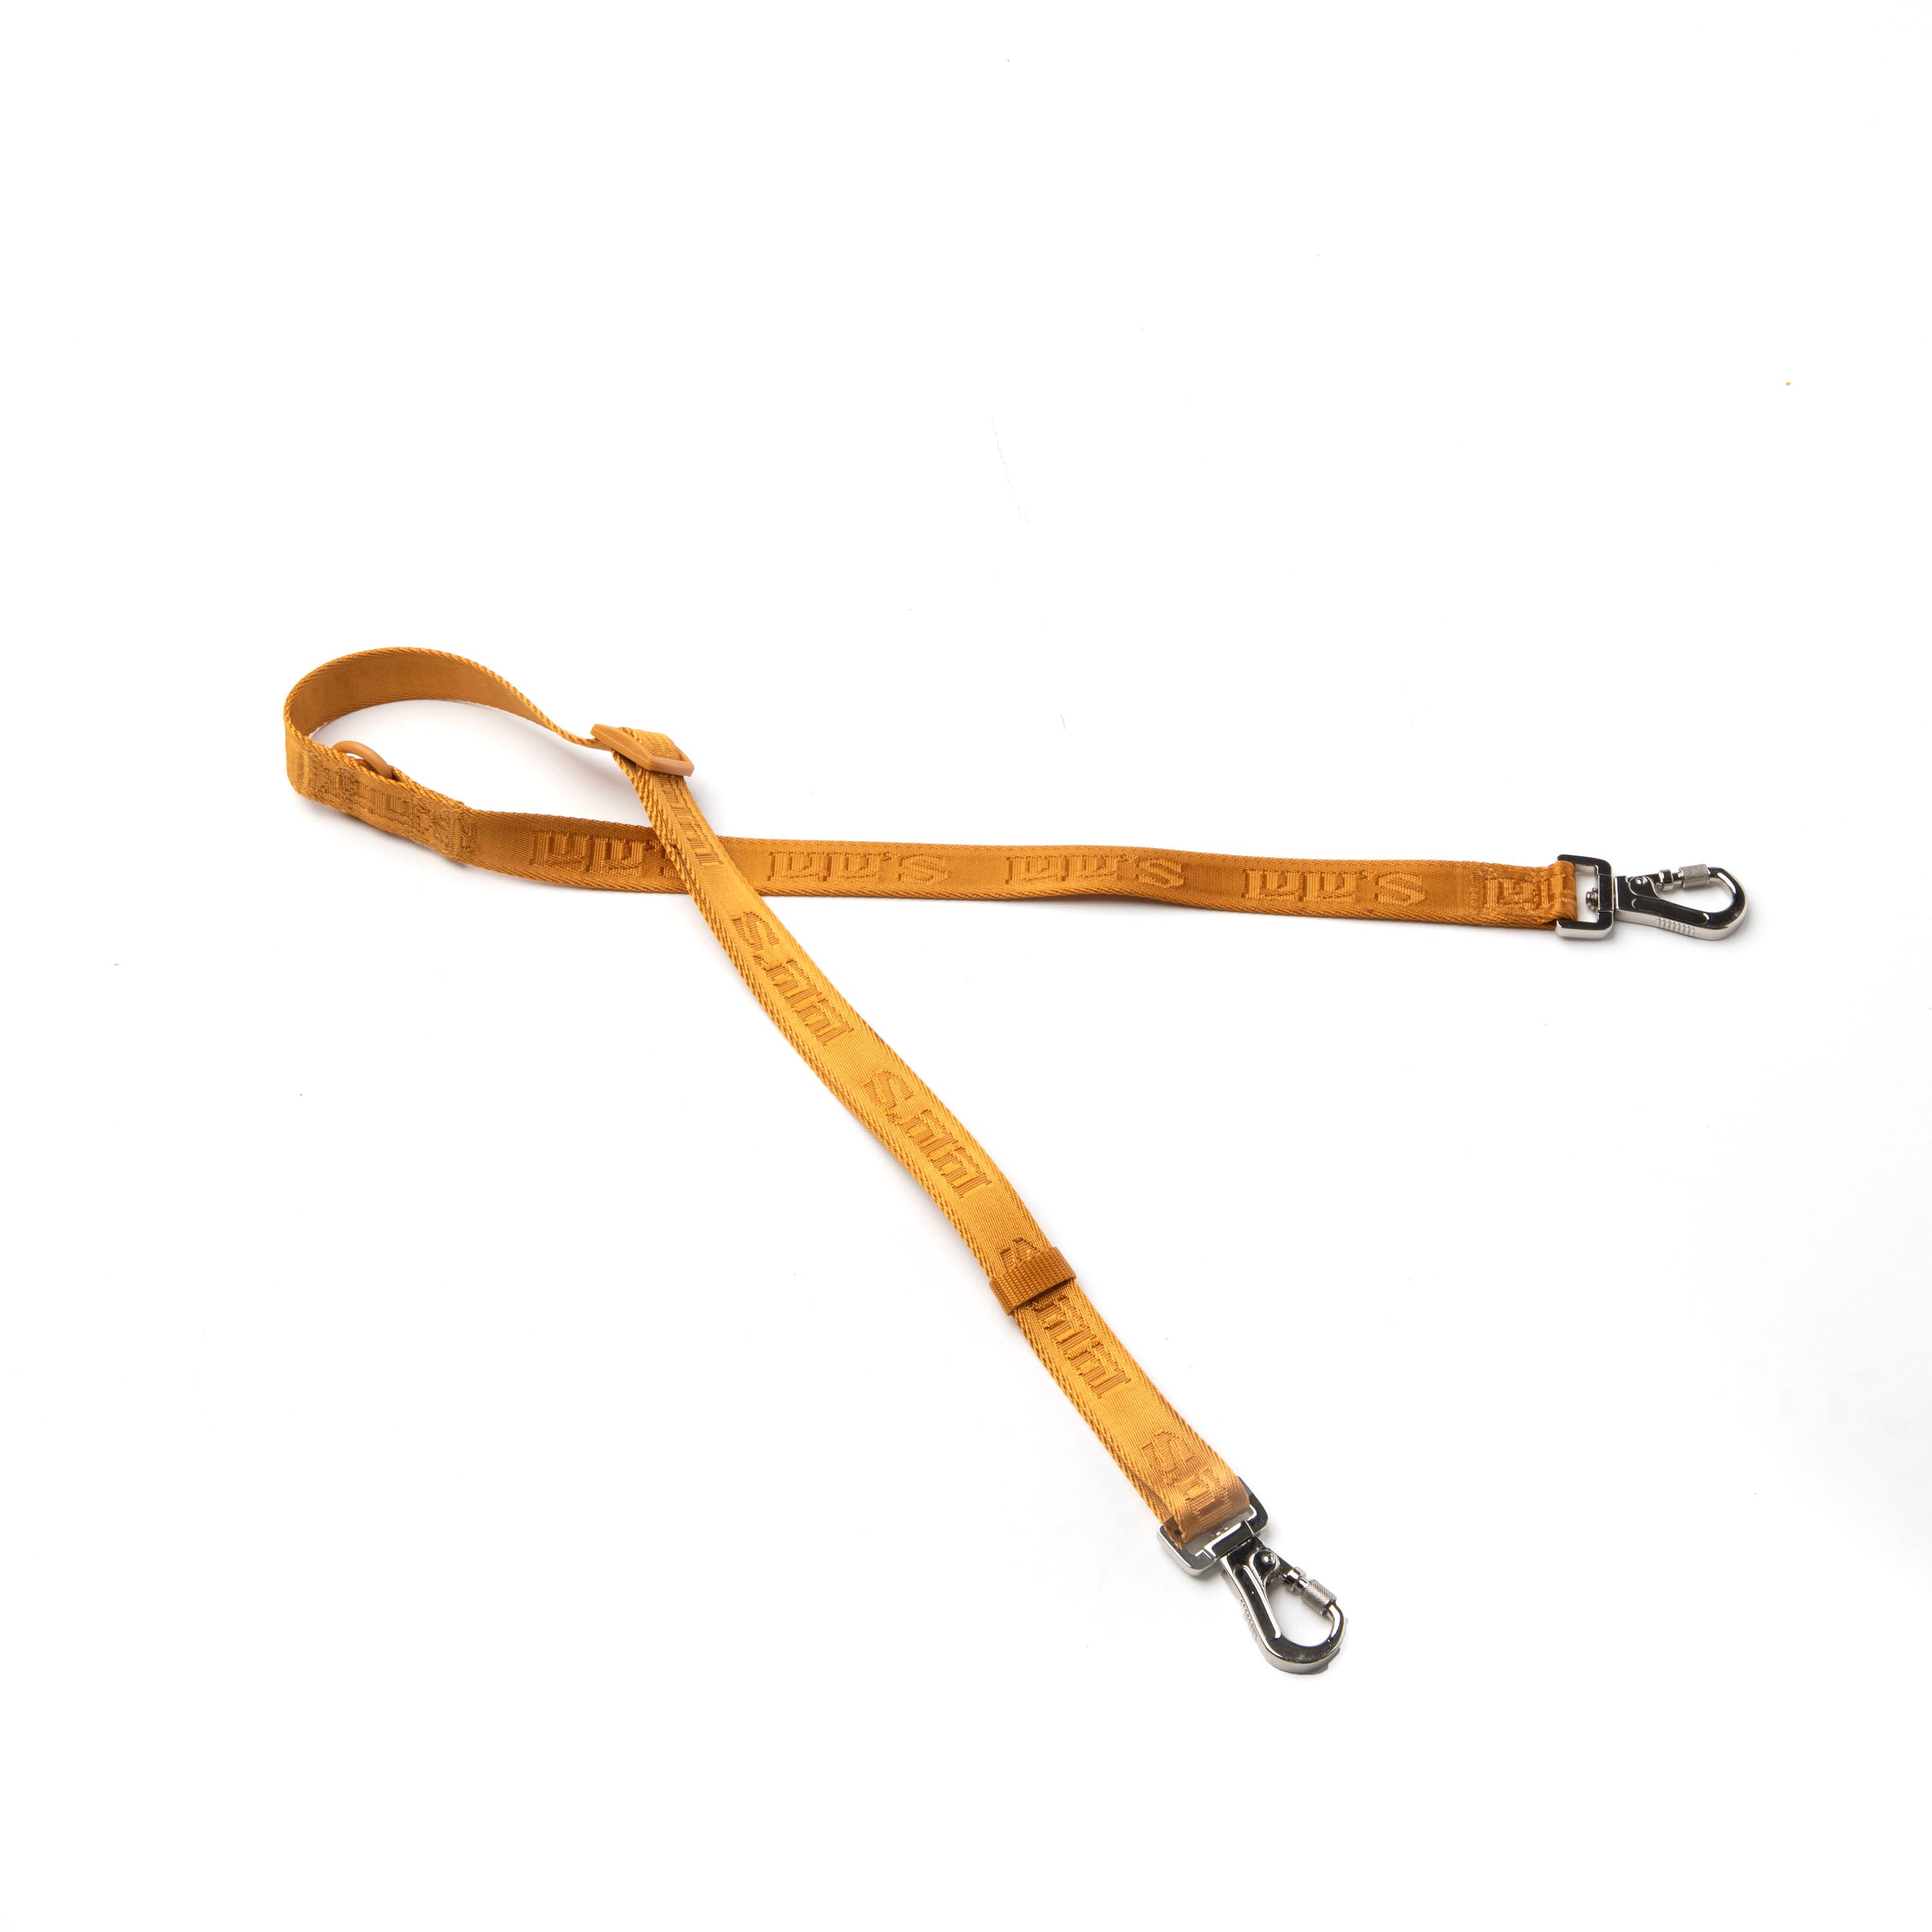 the Sand Orange Lulu's Leash combines durability, comfort, style, and  safety into one high-quality product